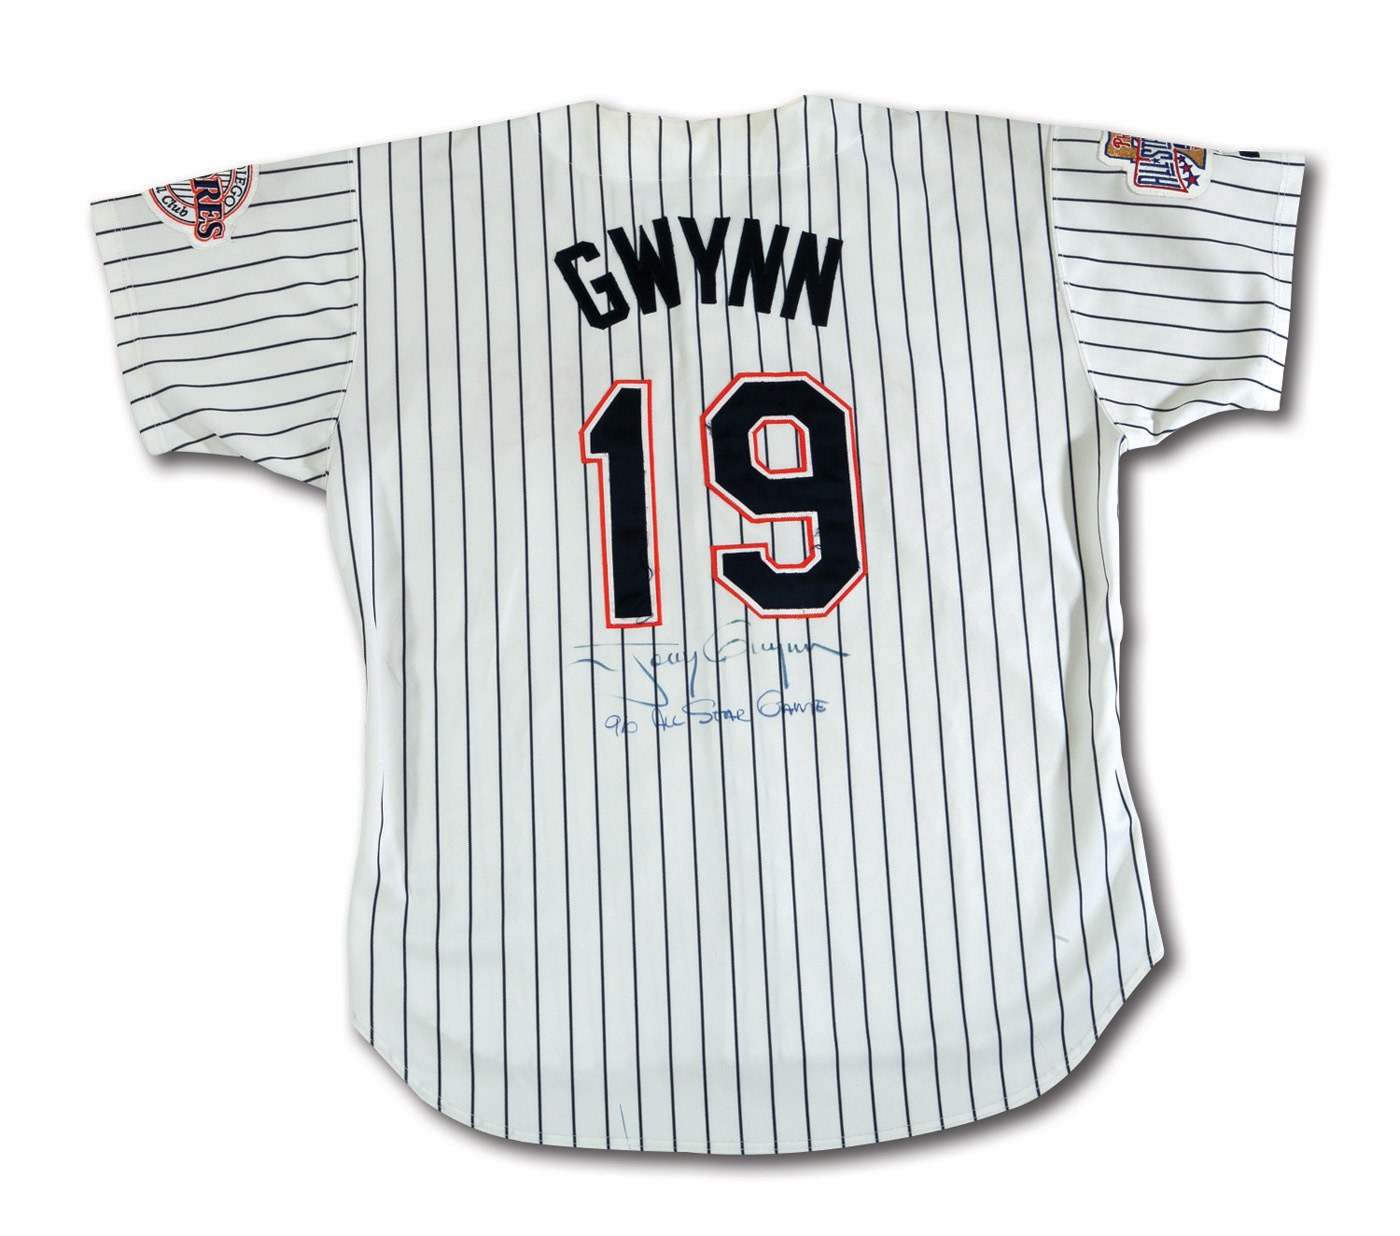 Tony Gwynn Autographed Game Used Jersey